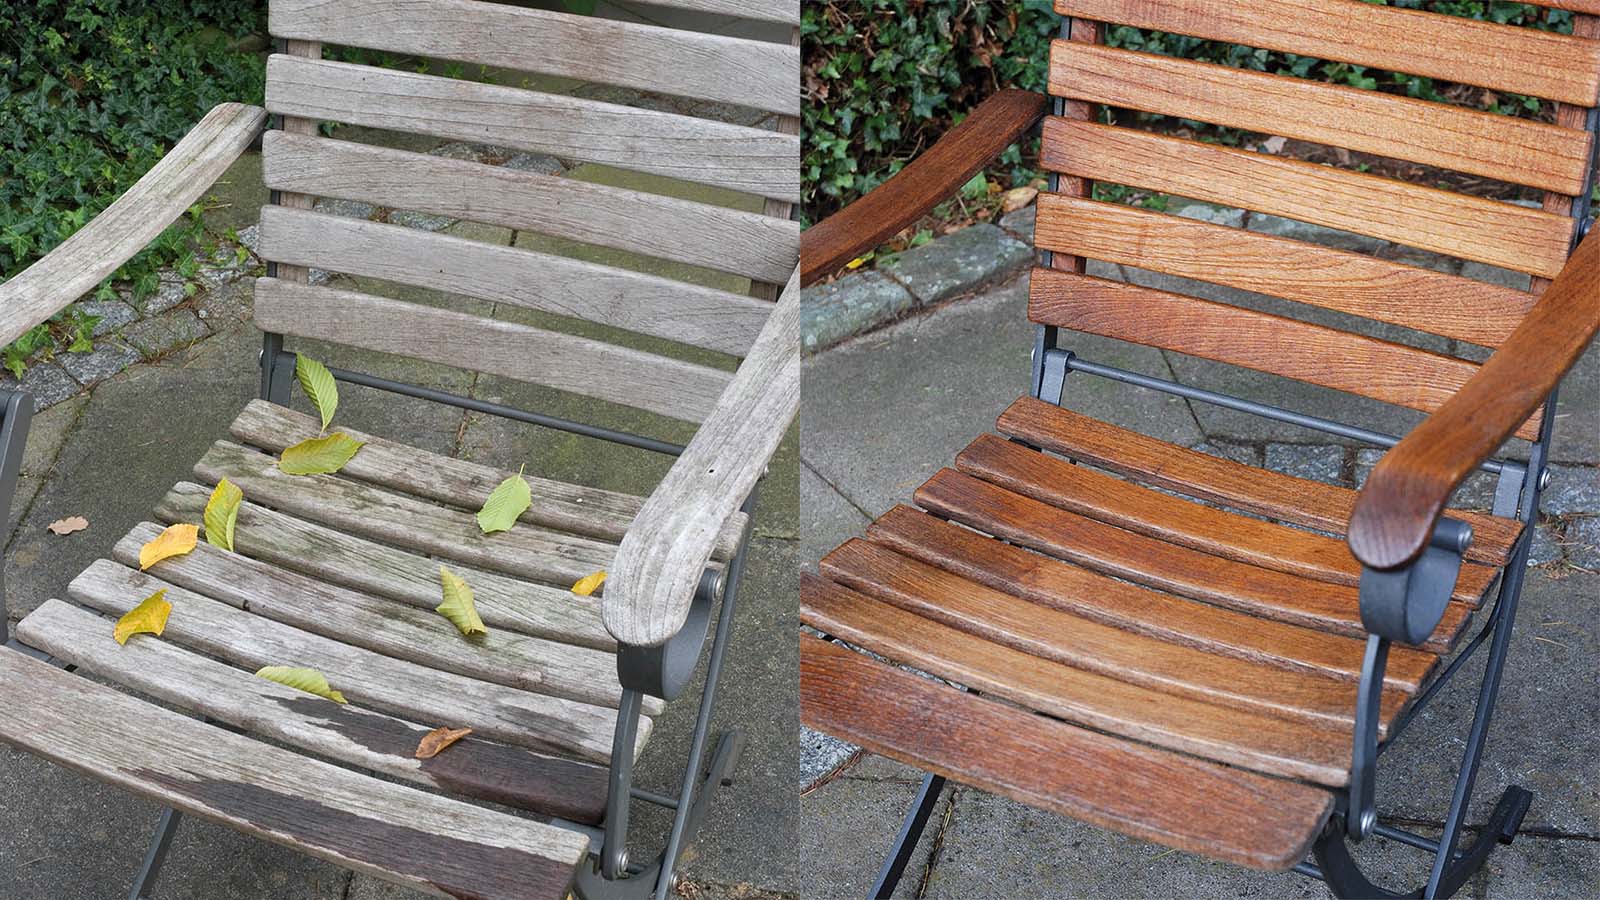 Renovate Wooden Garden Furniture With, What Kind Of Oil Do You Use On Outdoor Wood Furniture